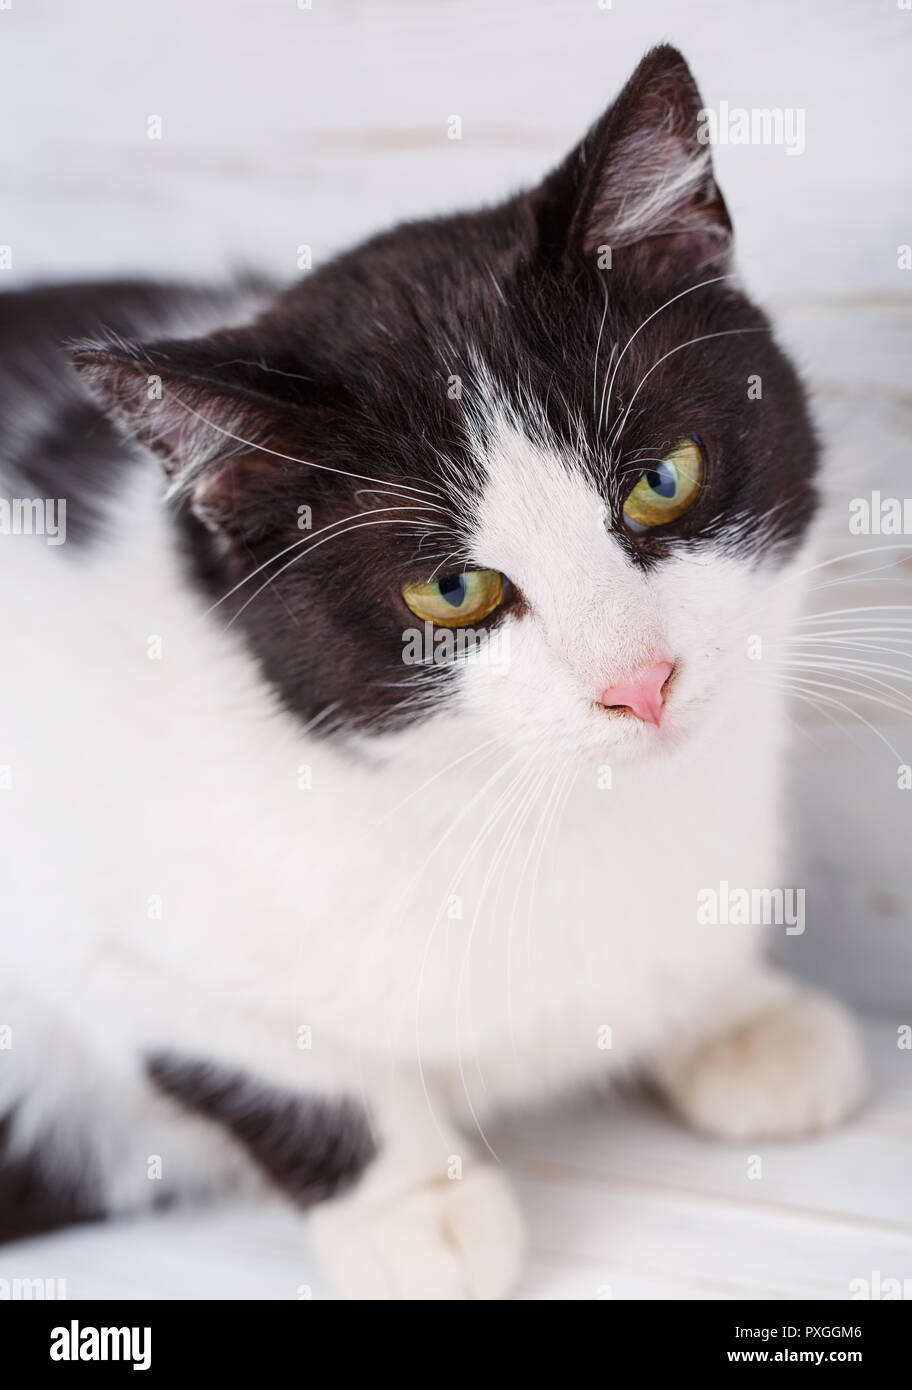 Portrait of a black and white cat on a light background. Stock Photo